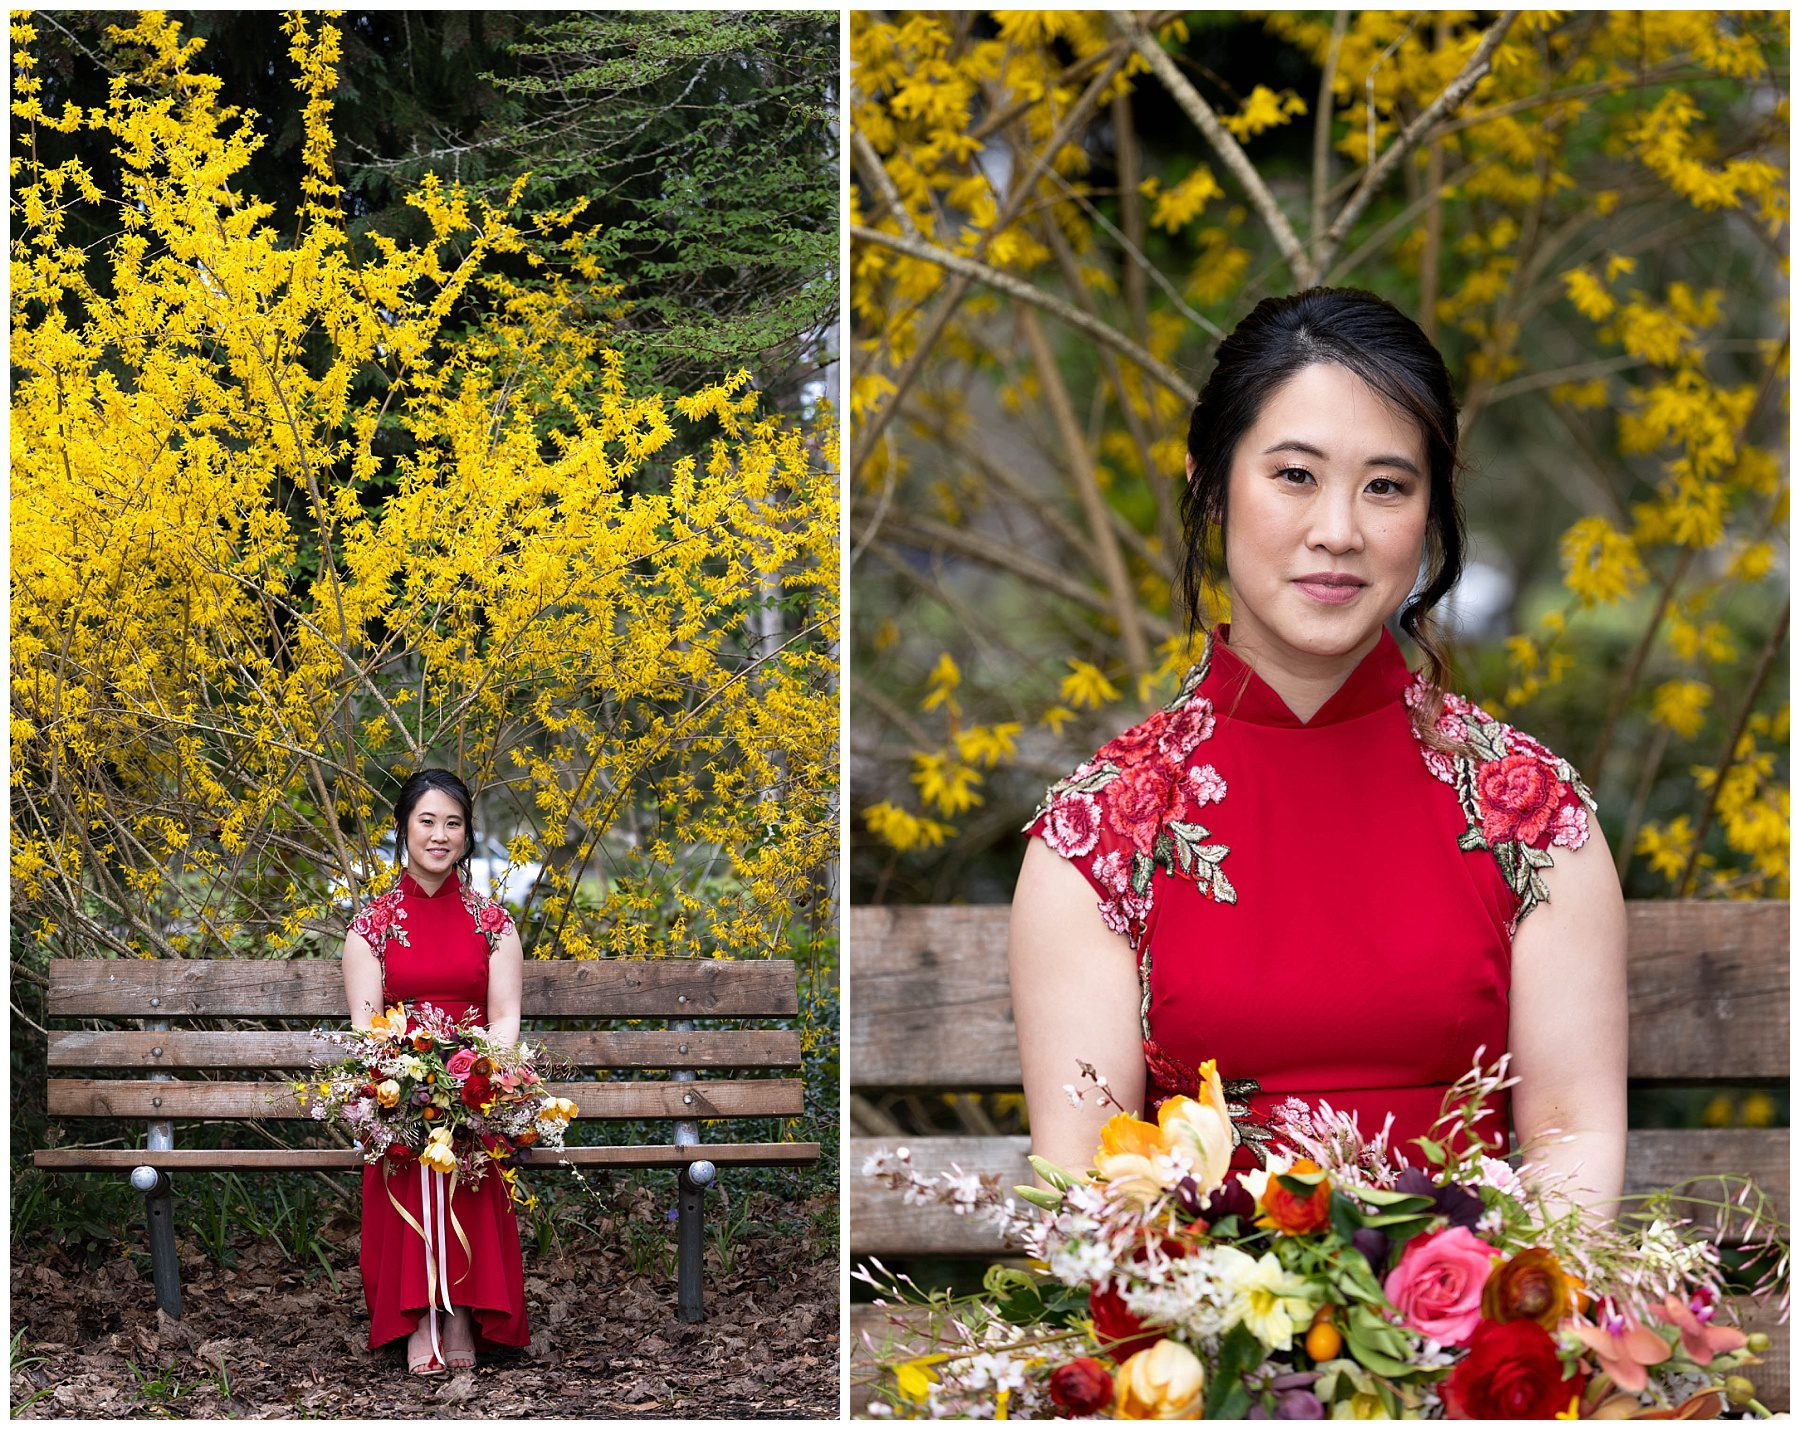 Asian bride sitting on bench wearing a red dress